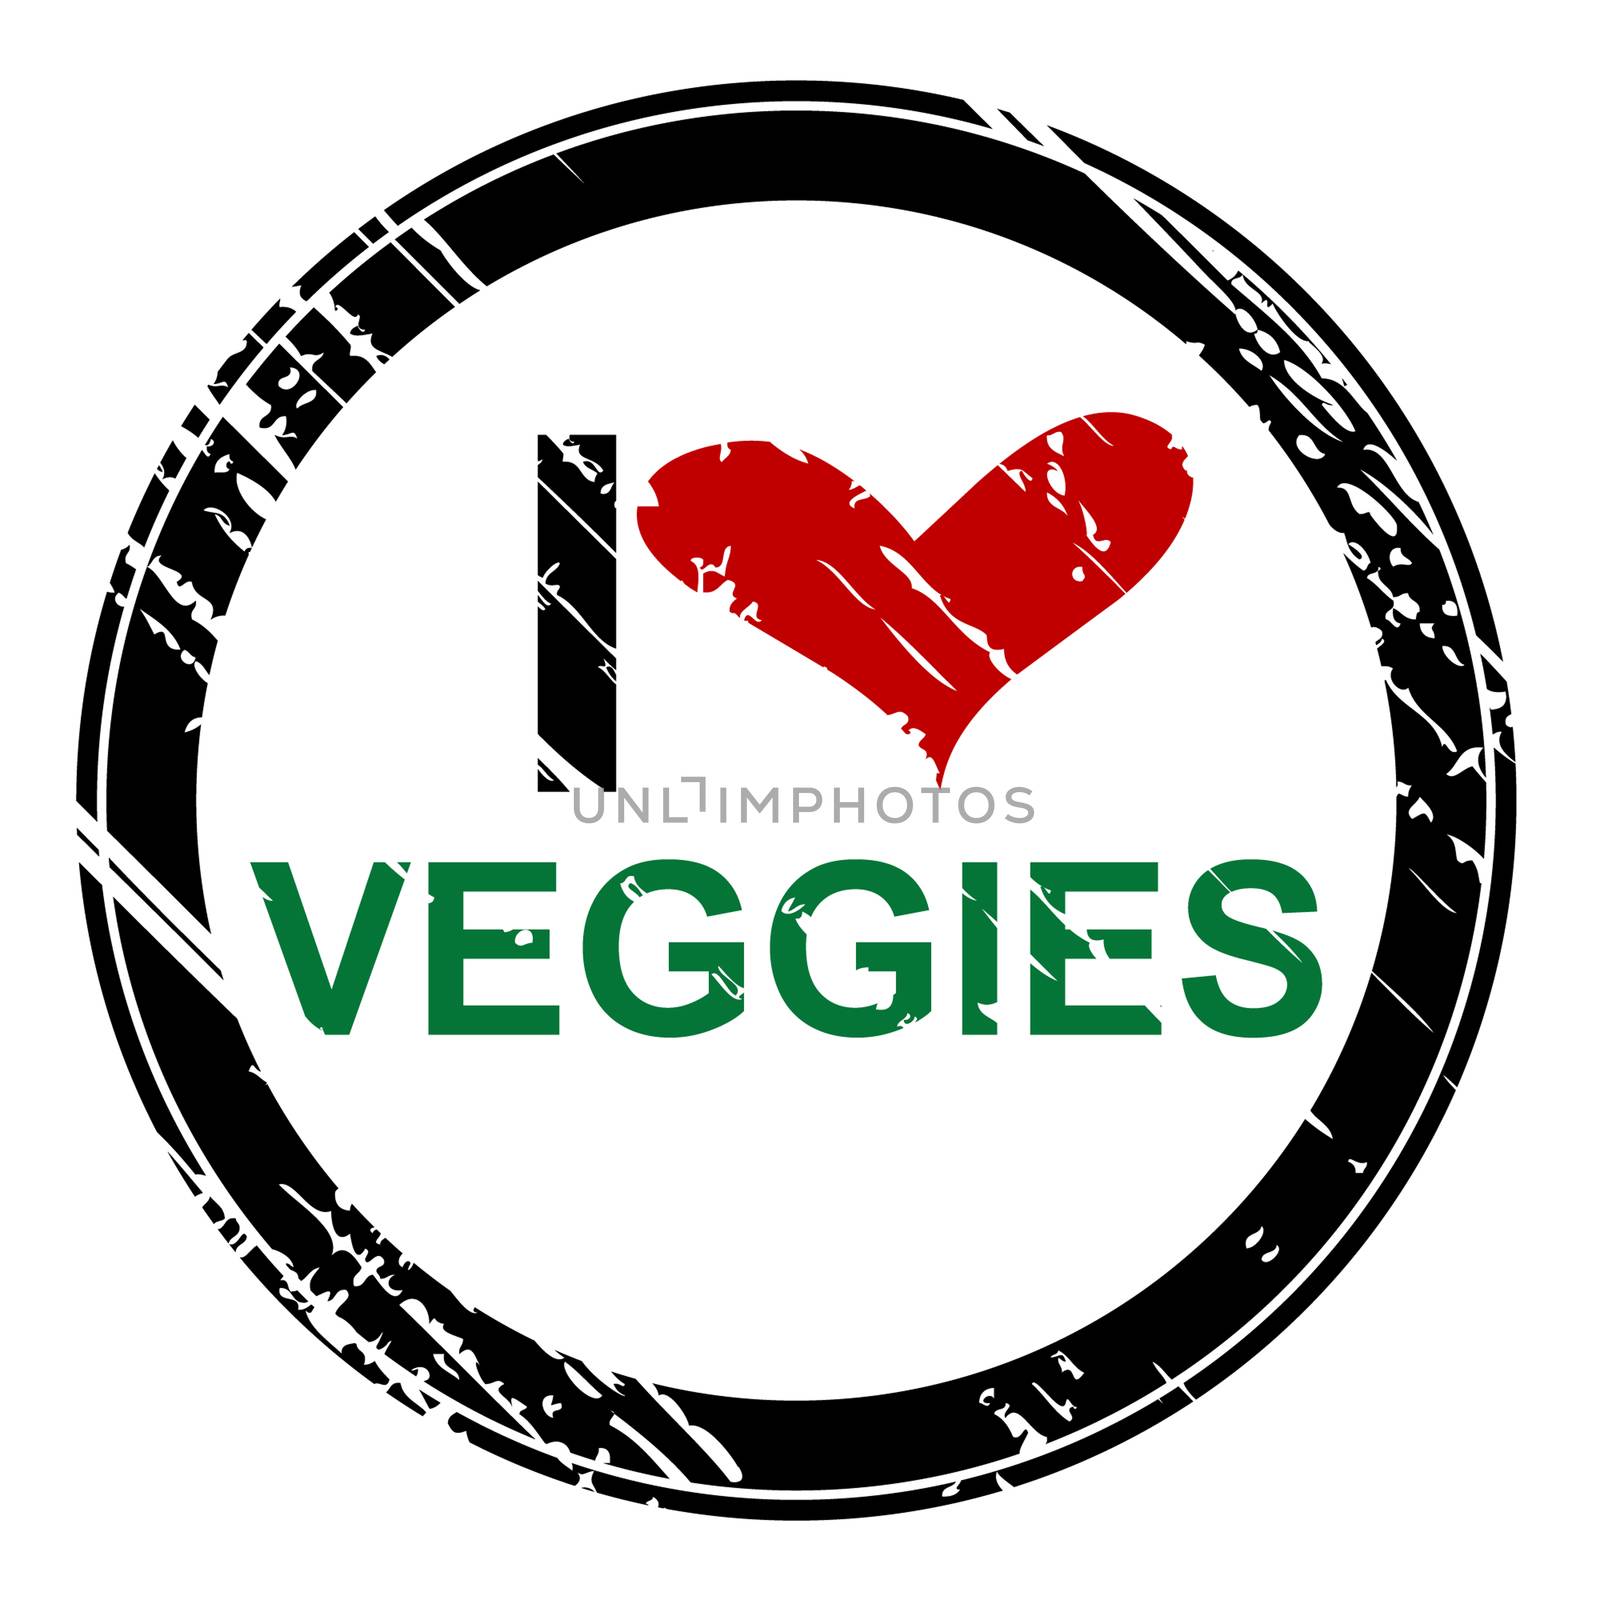 Rubber stamp with the text I love veggies by hibrida13